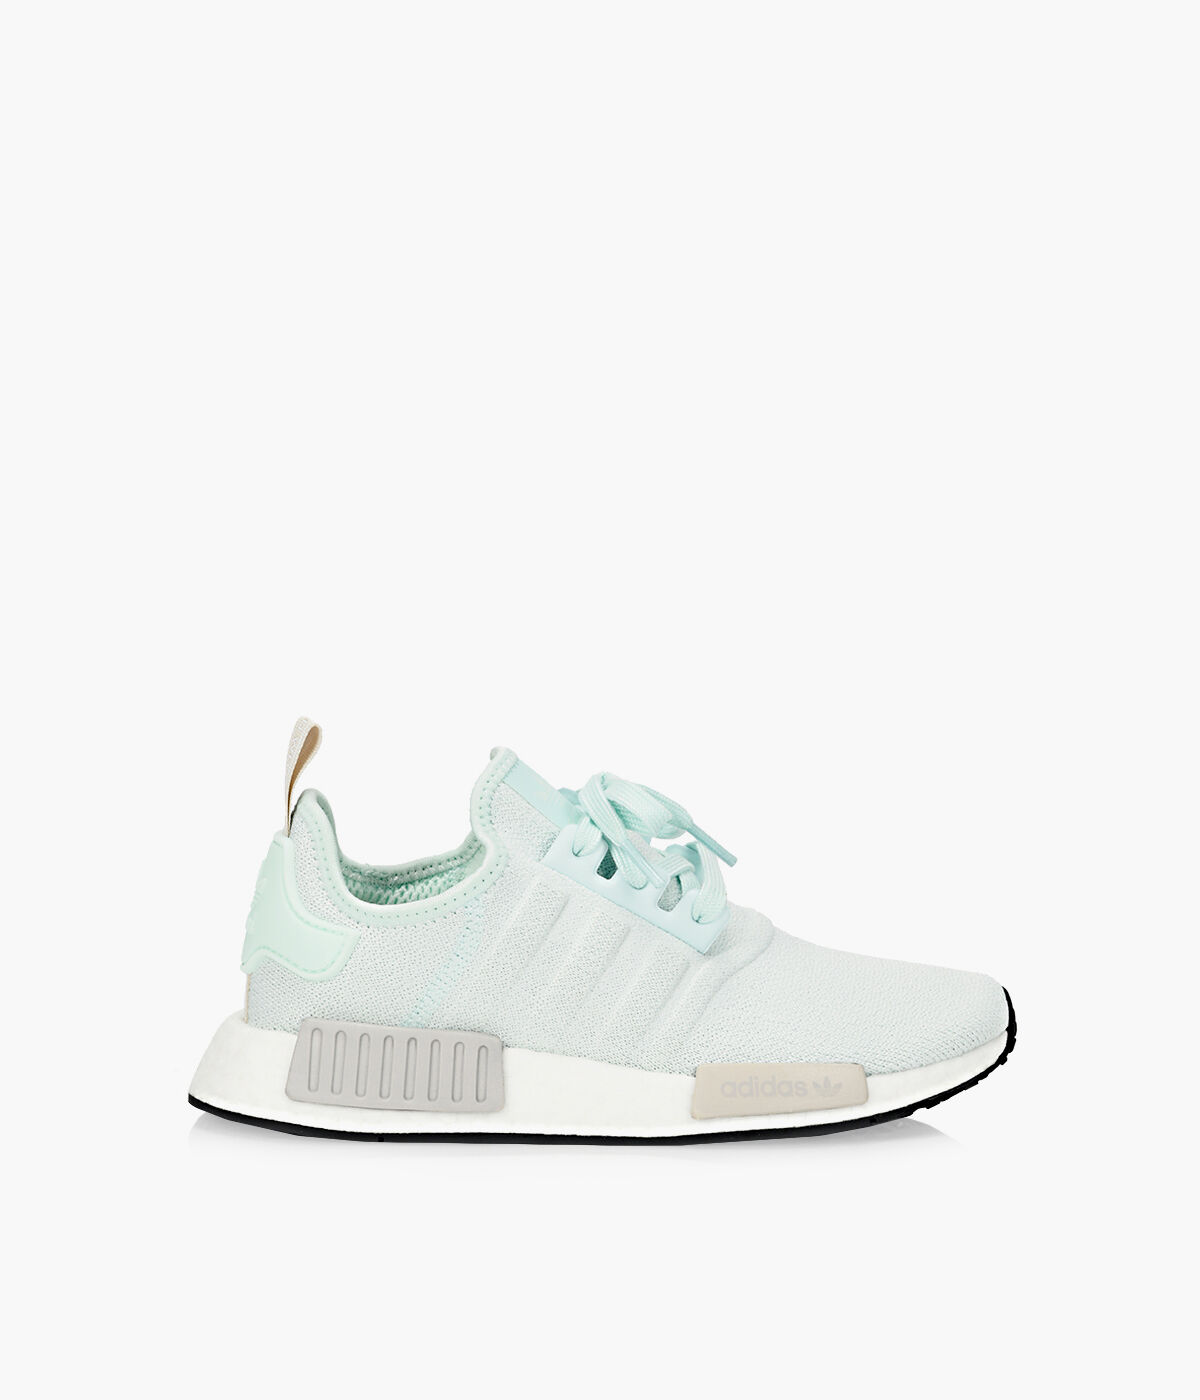 ADIDAS NMD R1 - Fabric | Browns Shoes